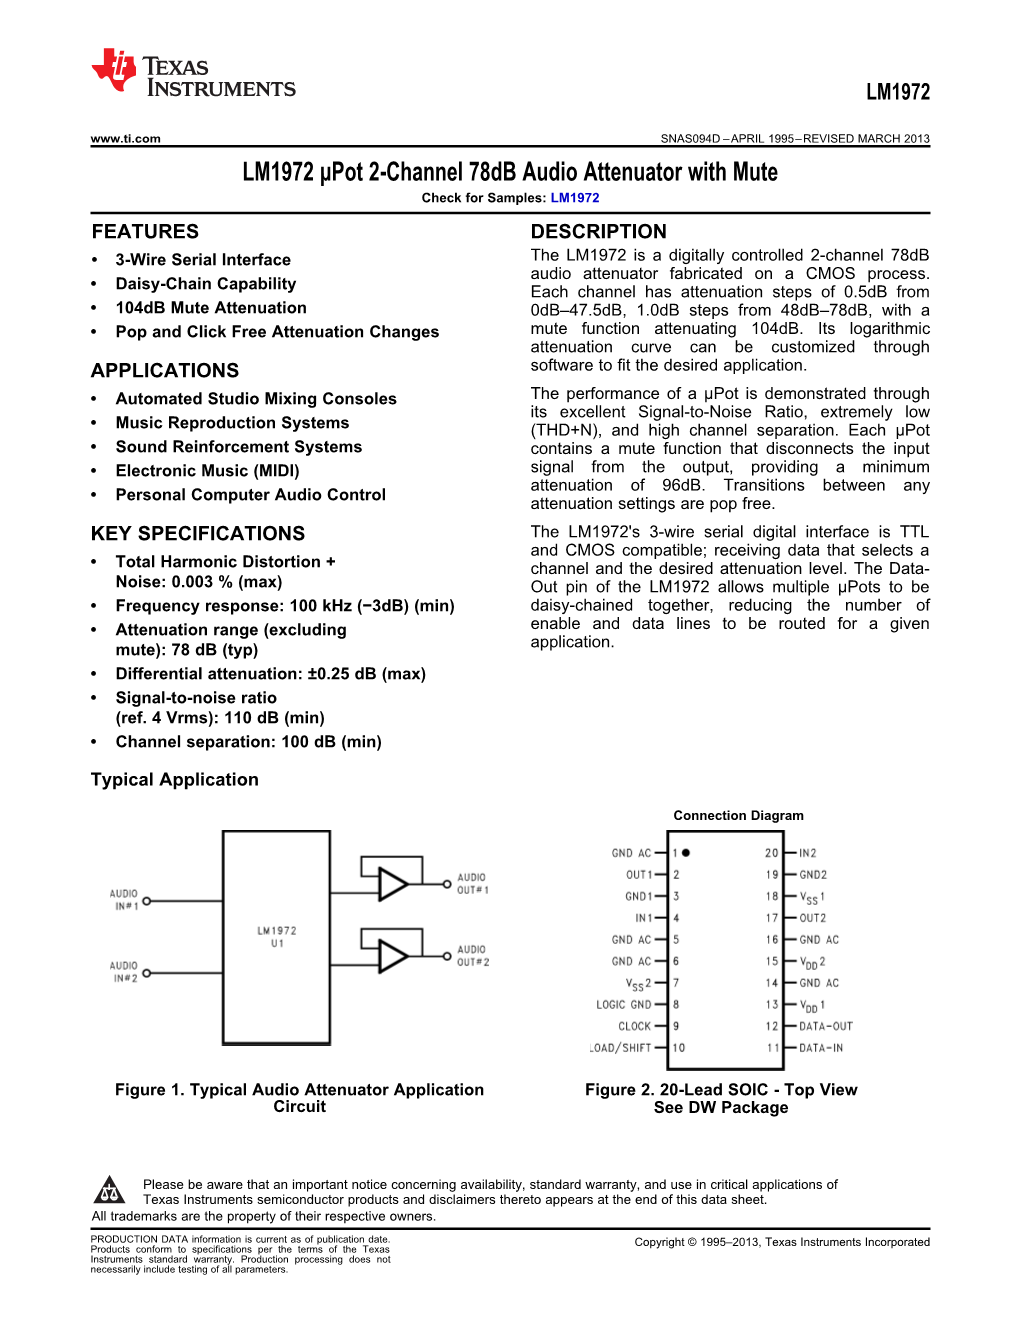 LM1972 Pot 2-Channel 78 Db Audio Attenuator with Mute Datasheet